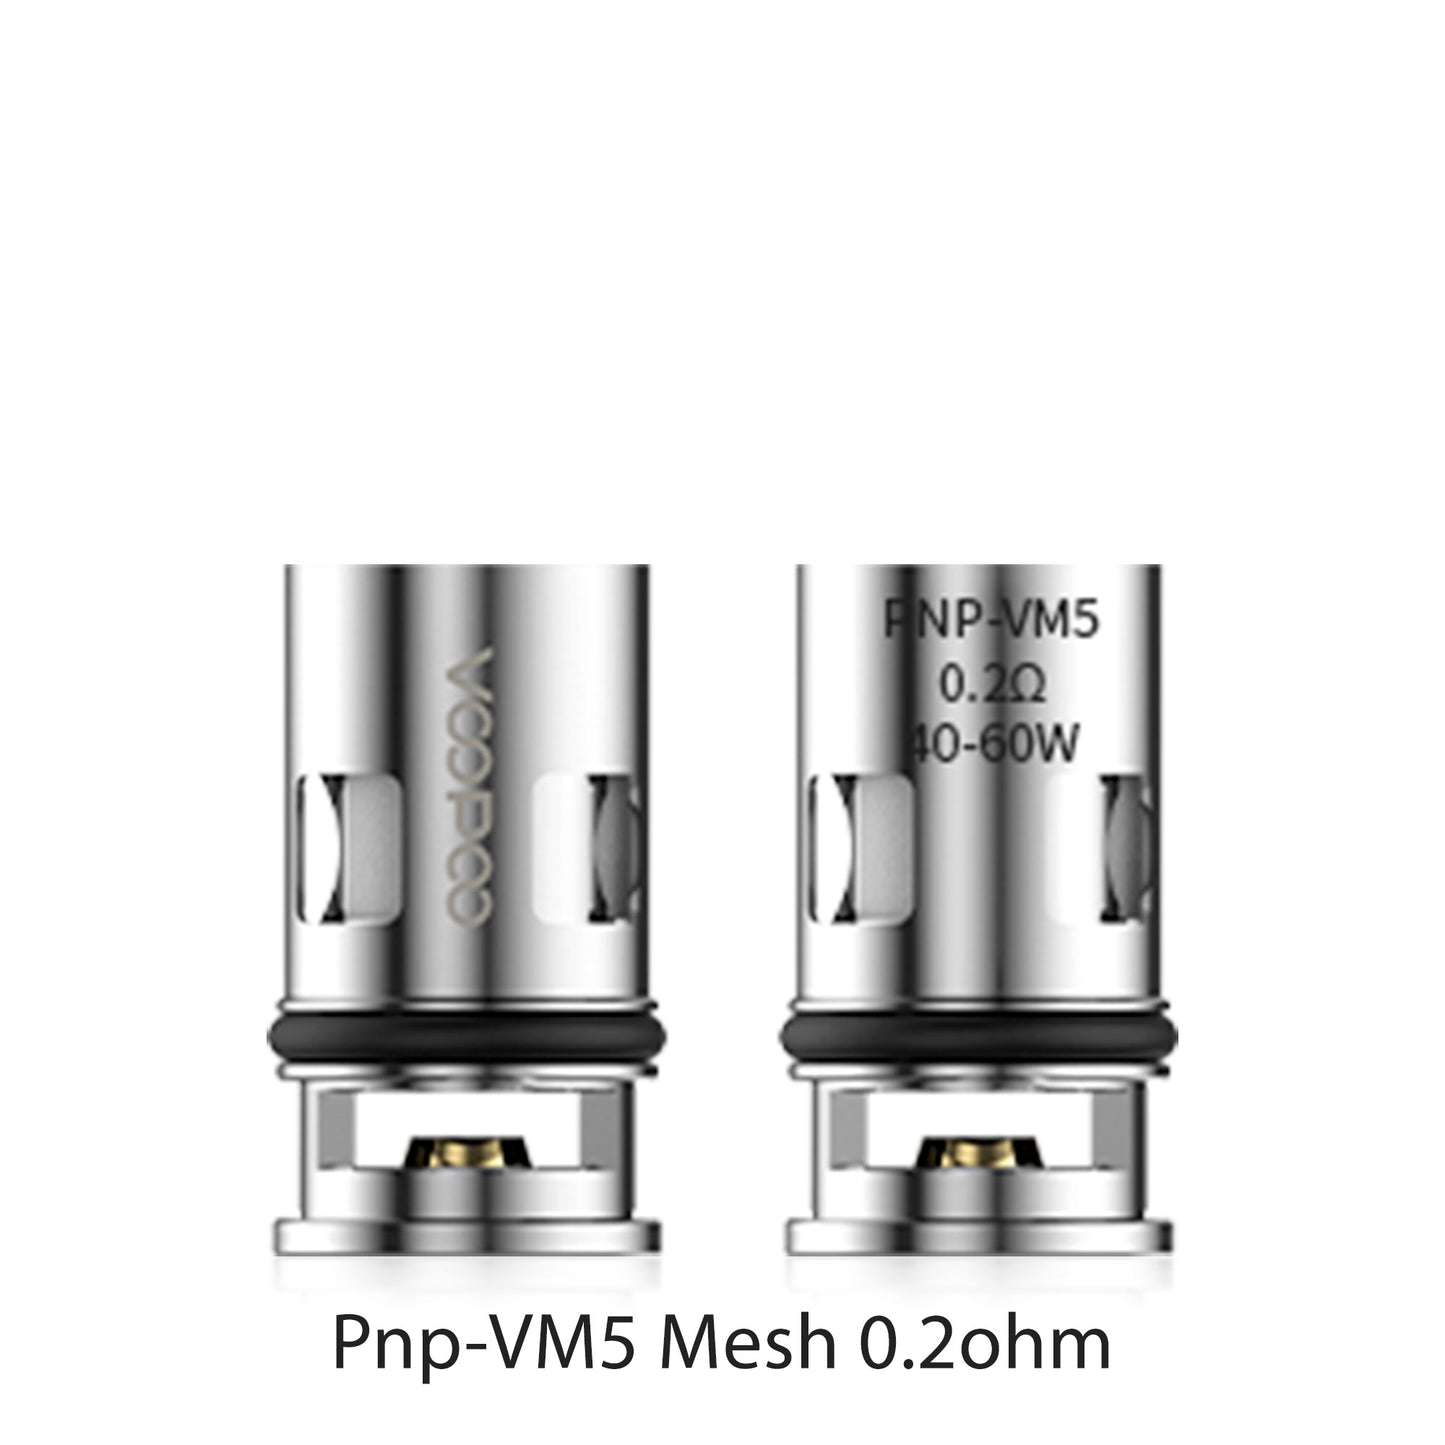 Voopoo PnP Replacement Coils 5-pack